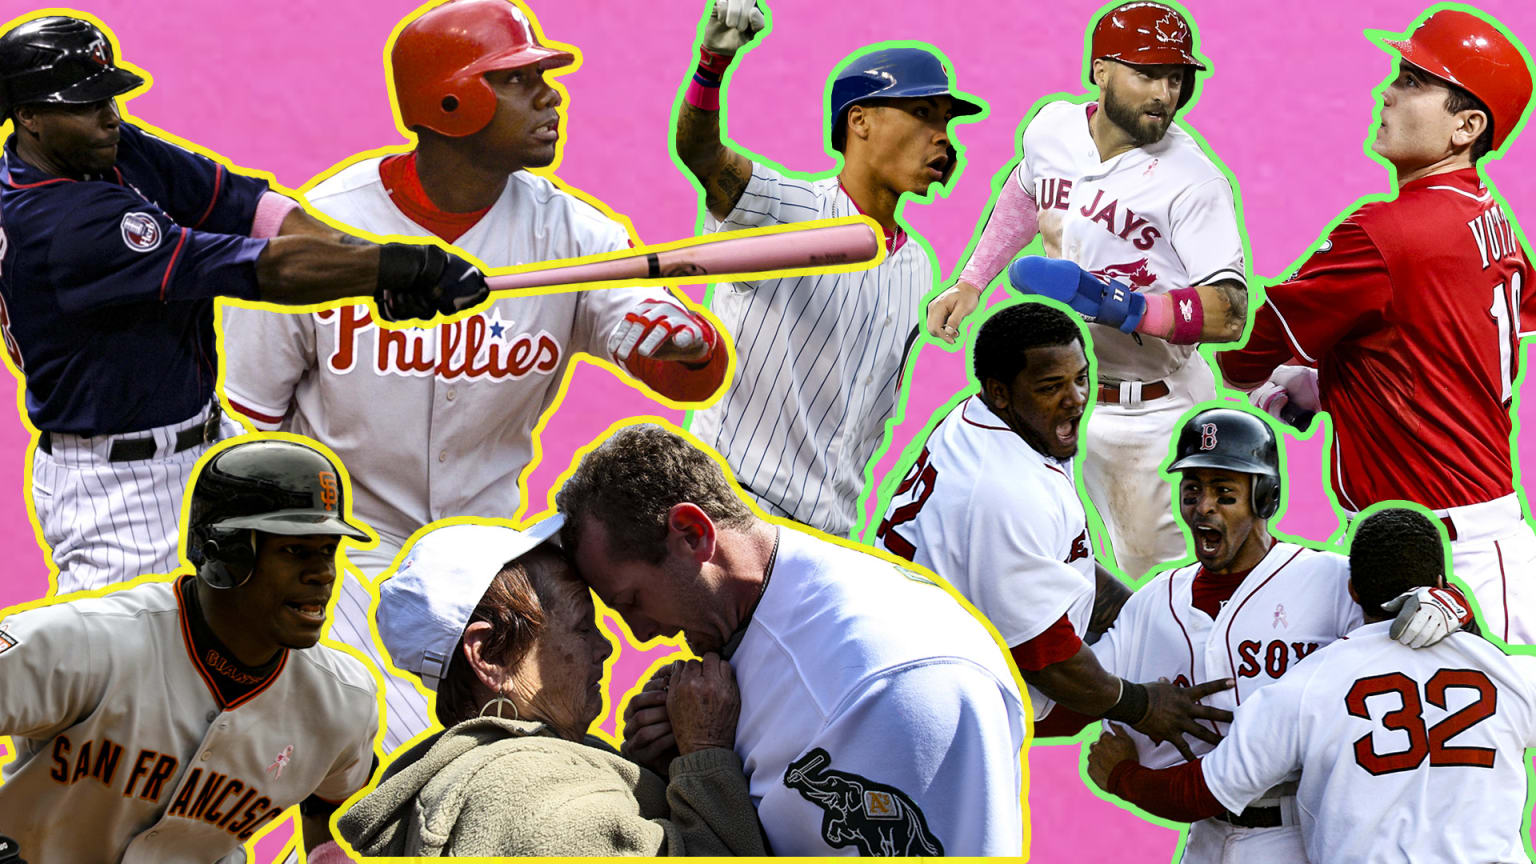 A photo illustration shows various players celebrating